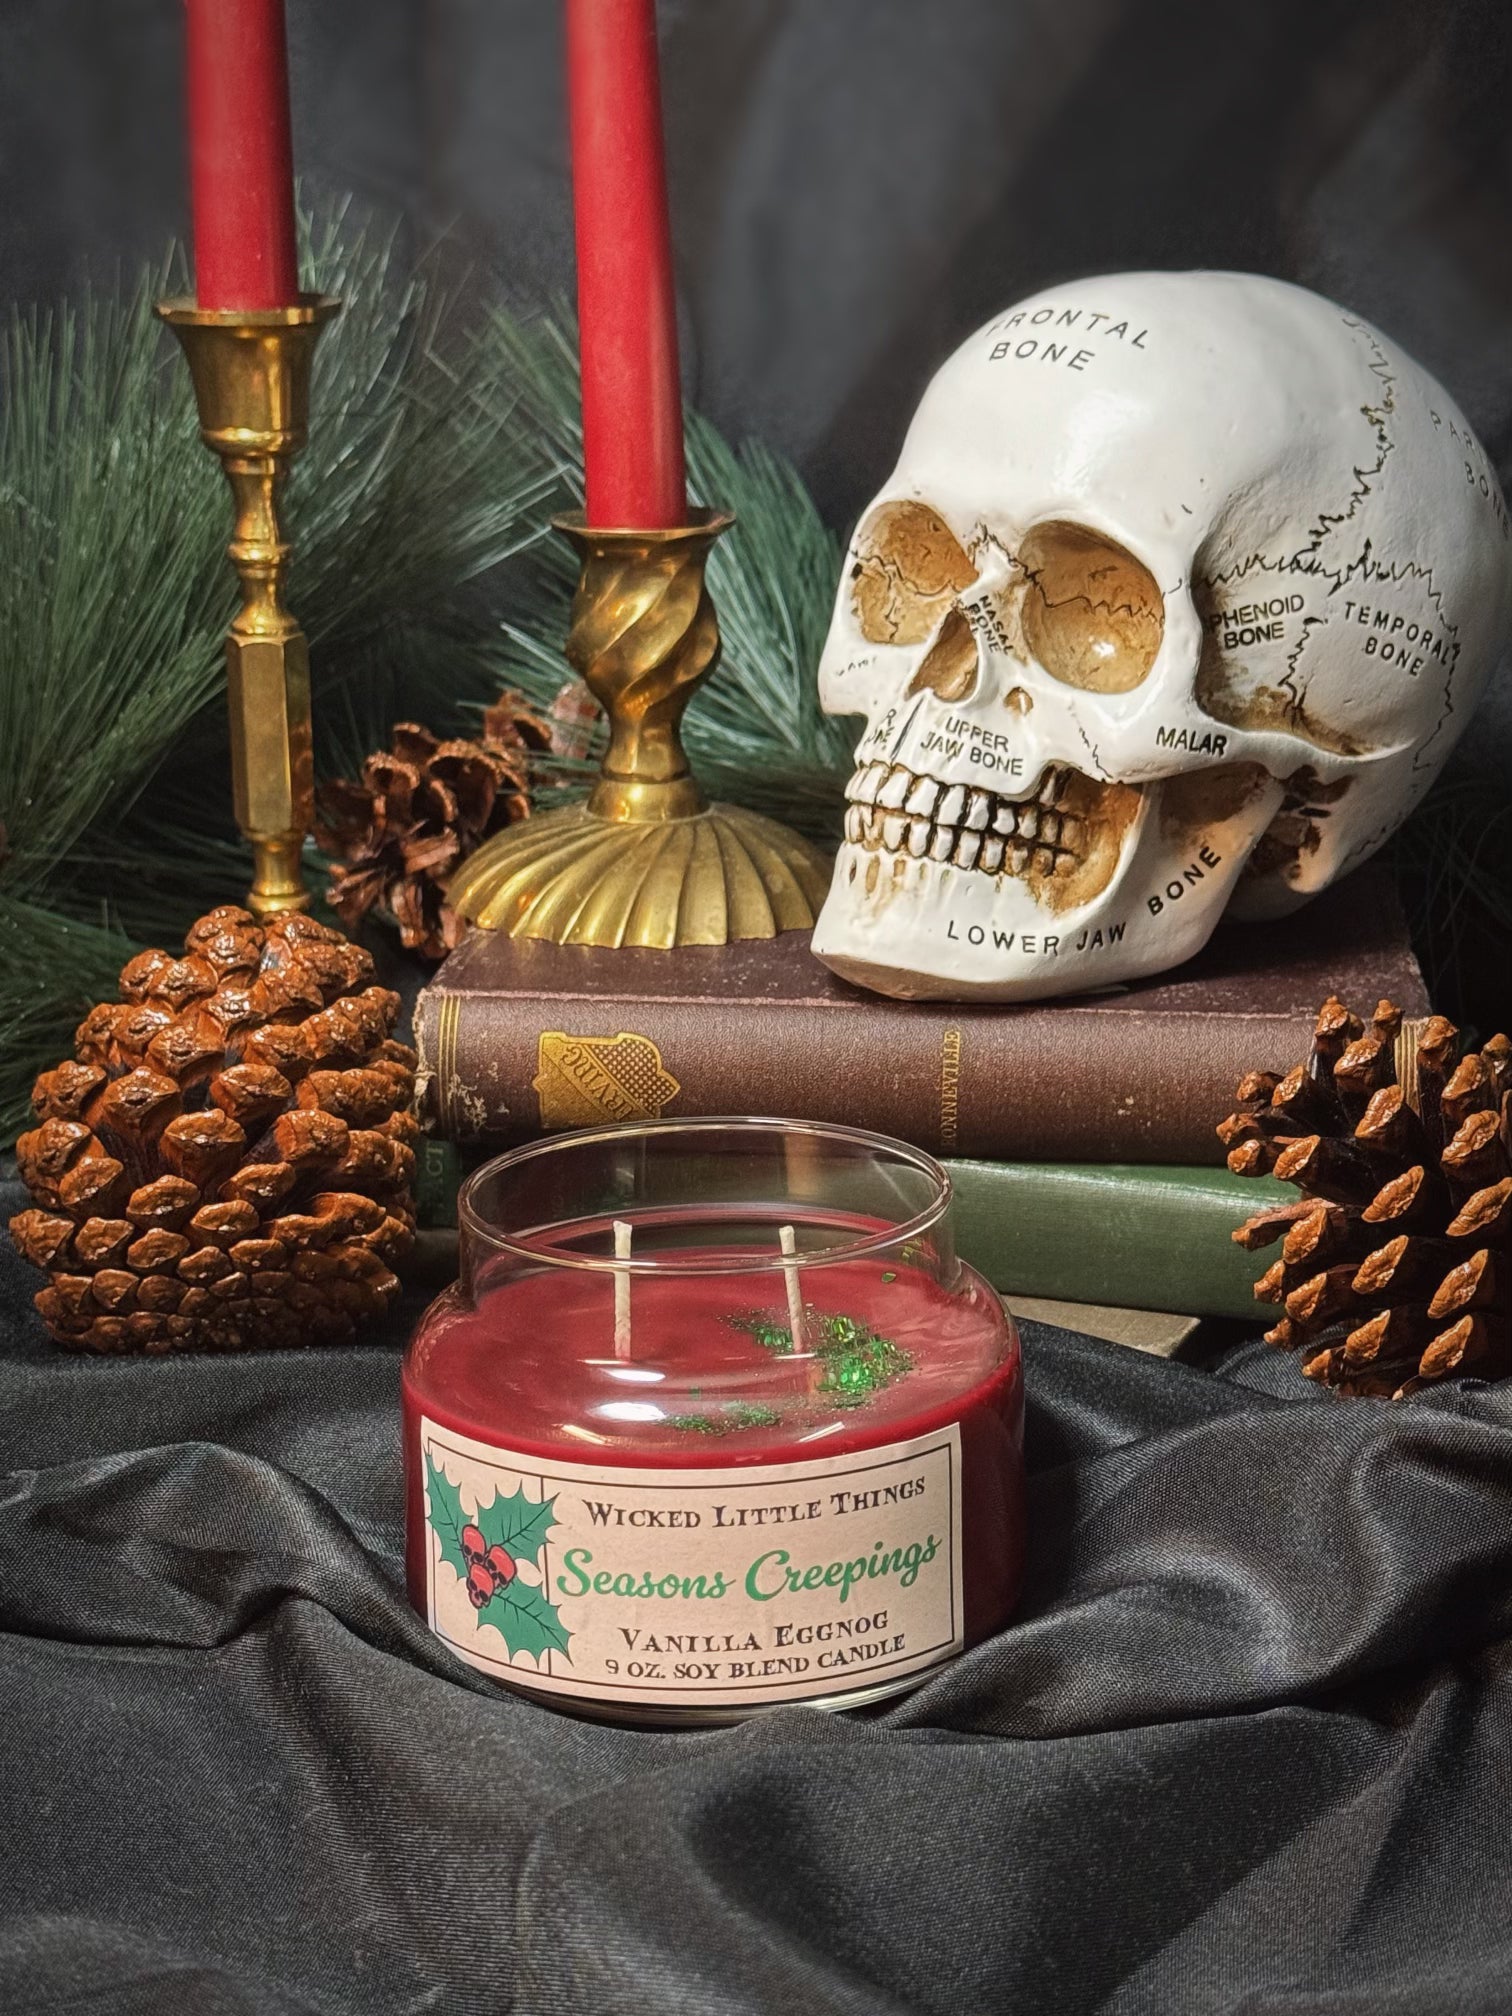 15 oz Silent Fright - Peppermint Mocha Double Cotton Wick Candle